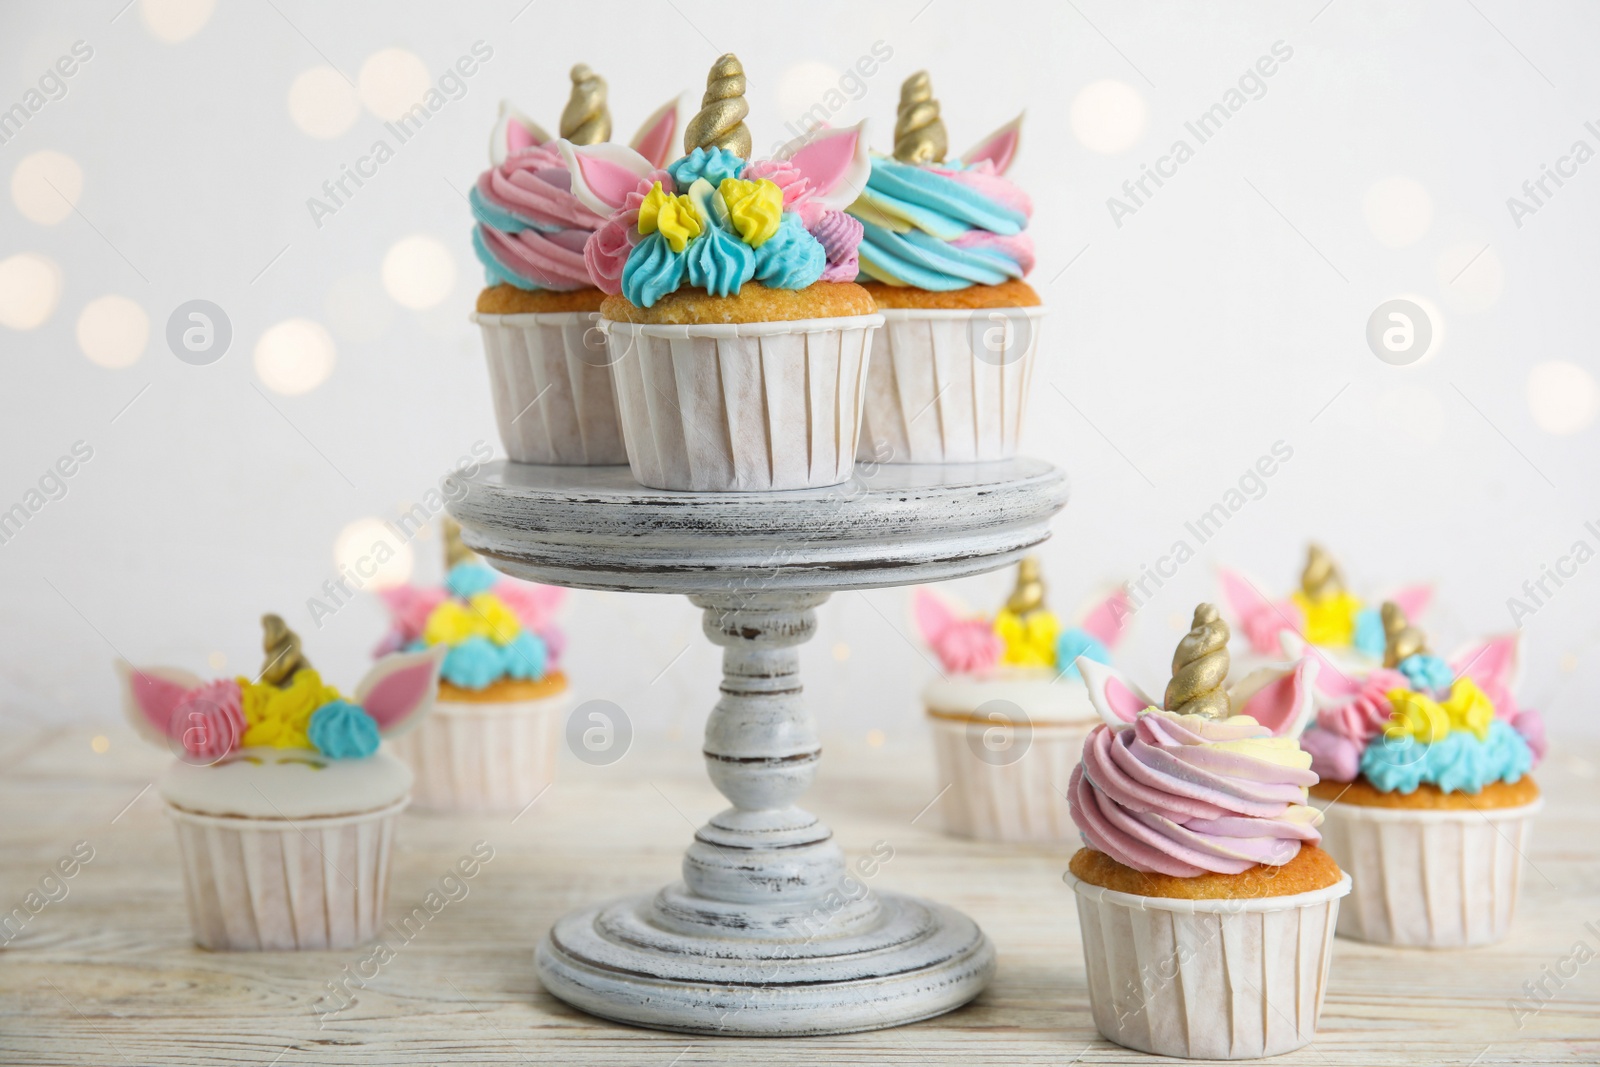 Photo of Cute sweet unicorn cupcakes on white wooden table